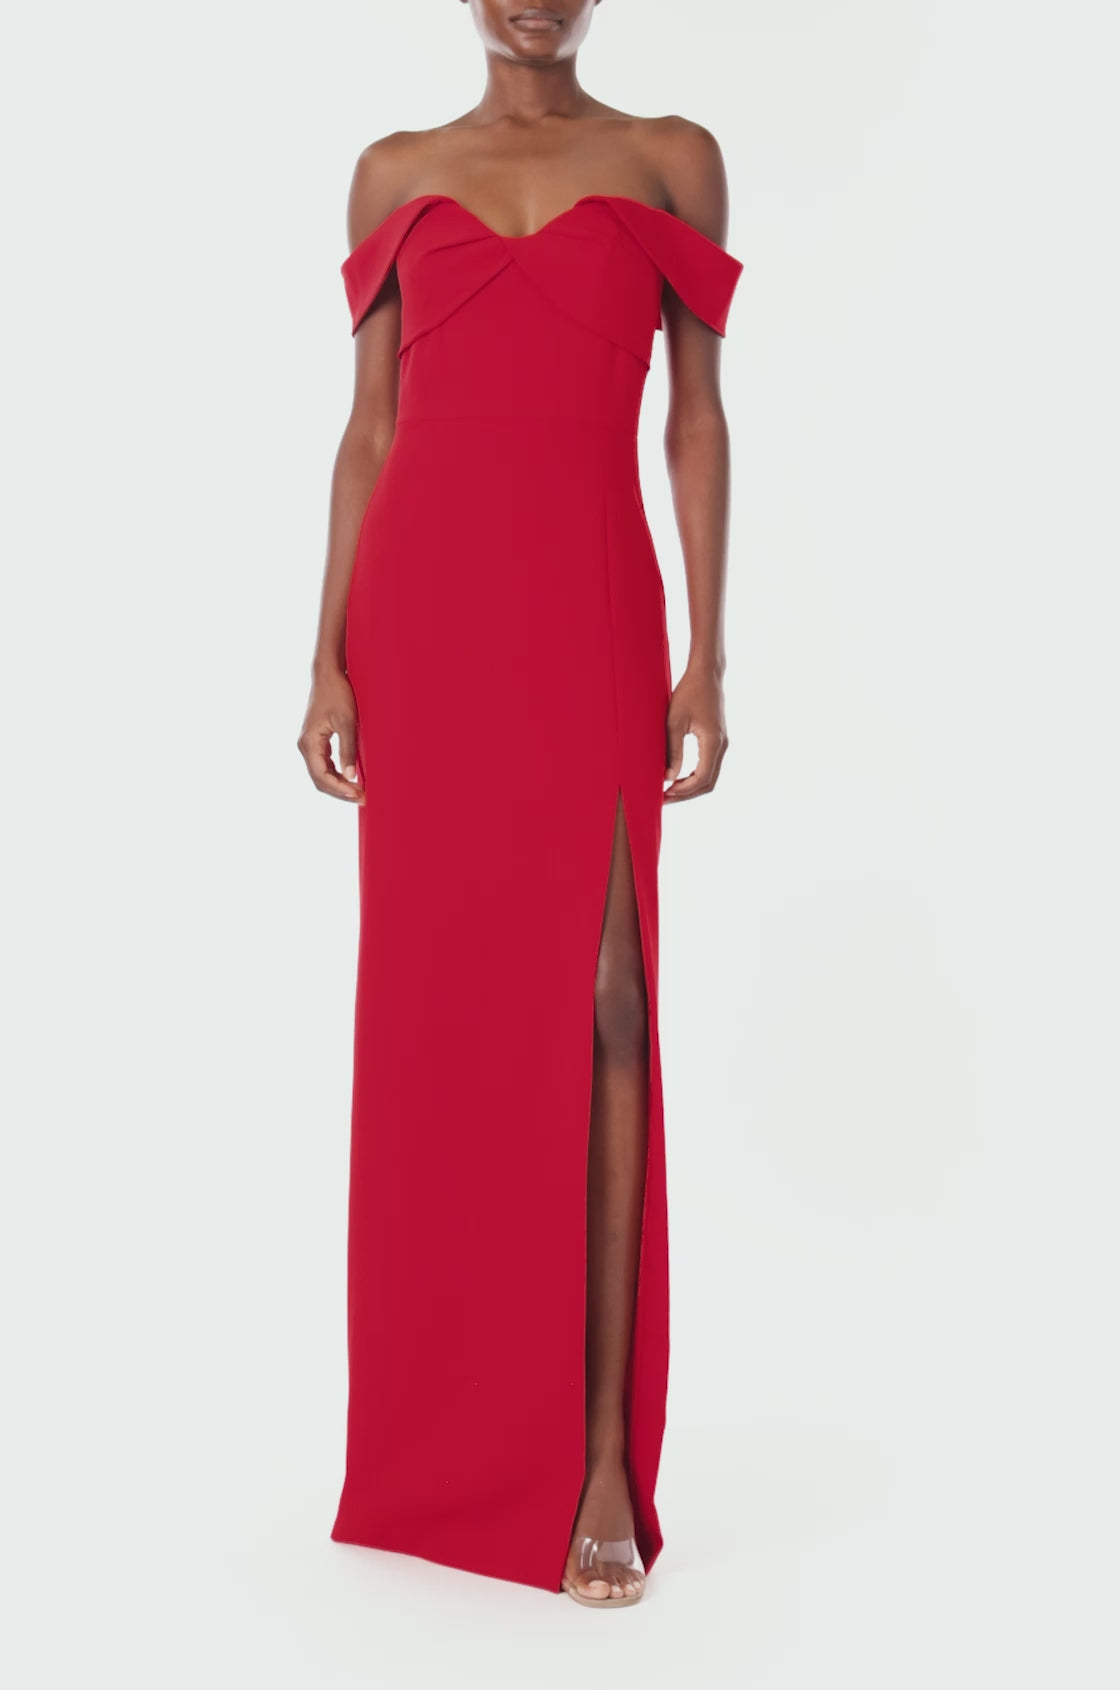 ML Monique Lhuillier red crêpe long dress with off the shoulder, sweetheart neckline.